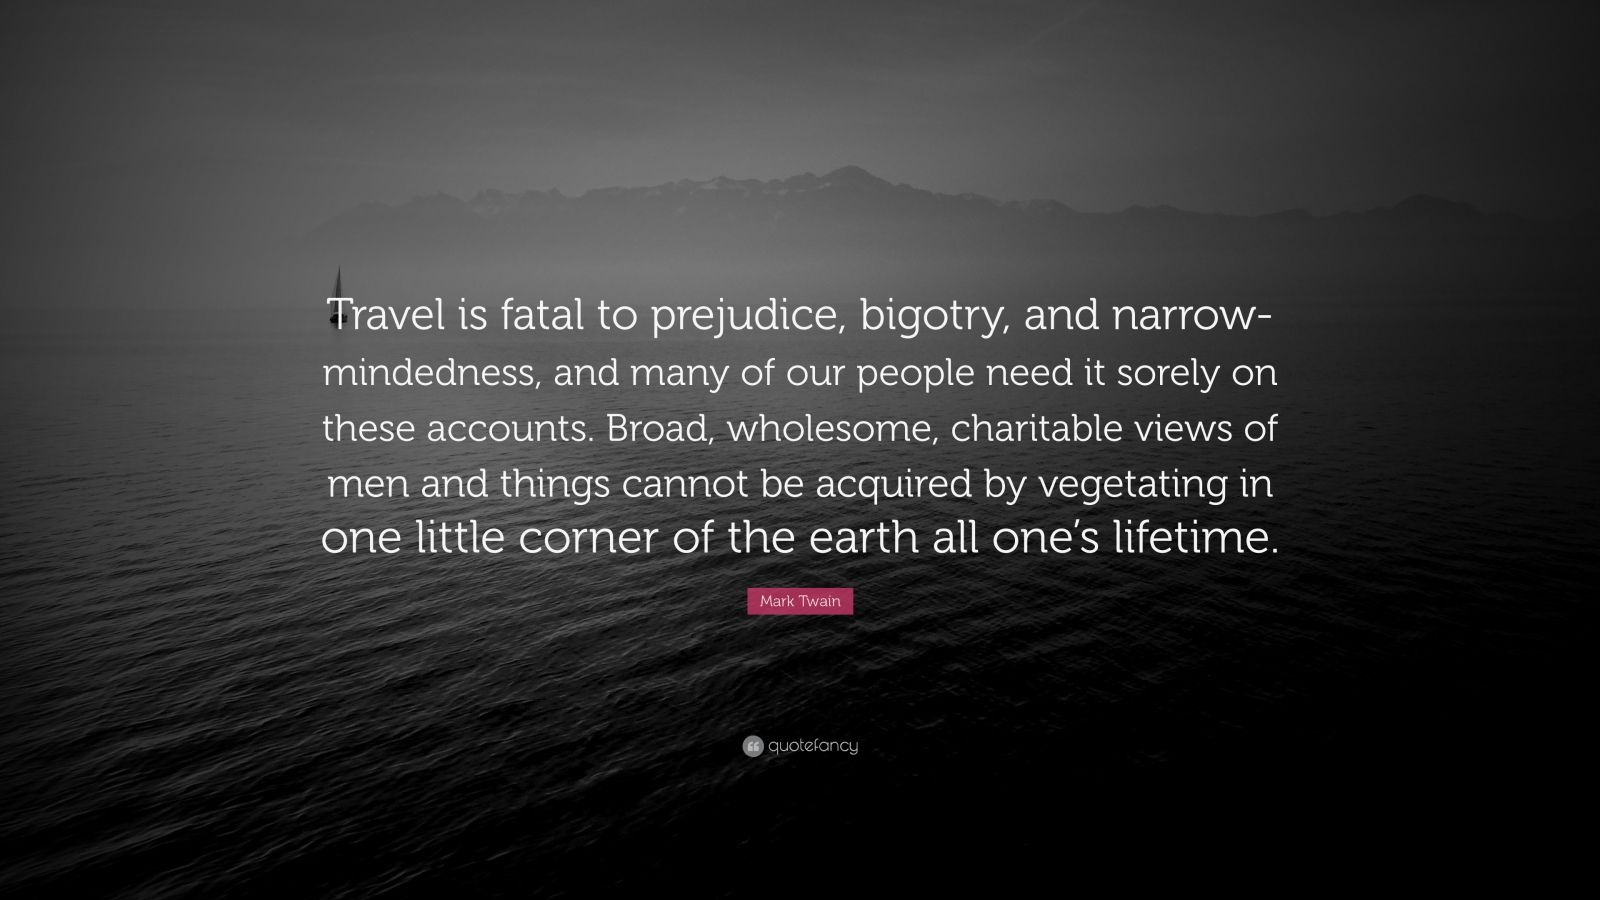 Mark Twain Quote: “Travel is fatal to prejudice, bigotry, and narrow ...